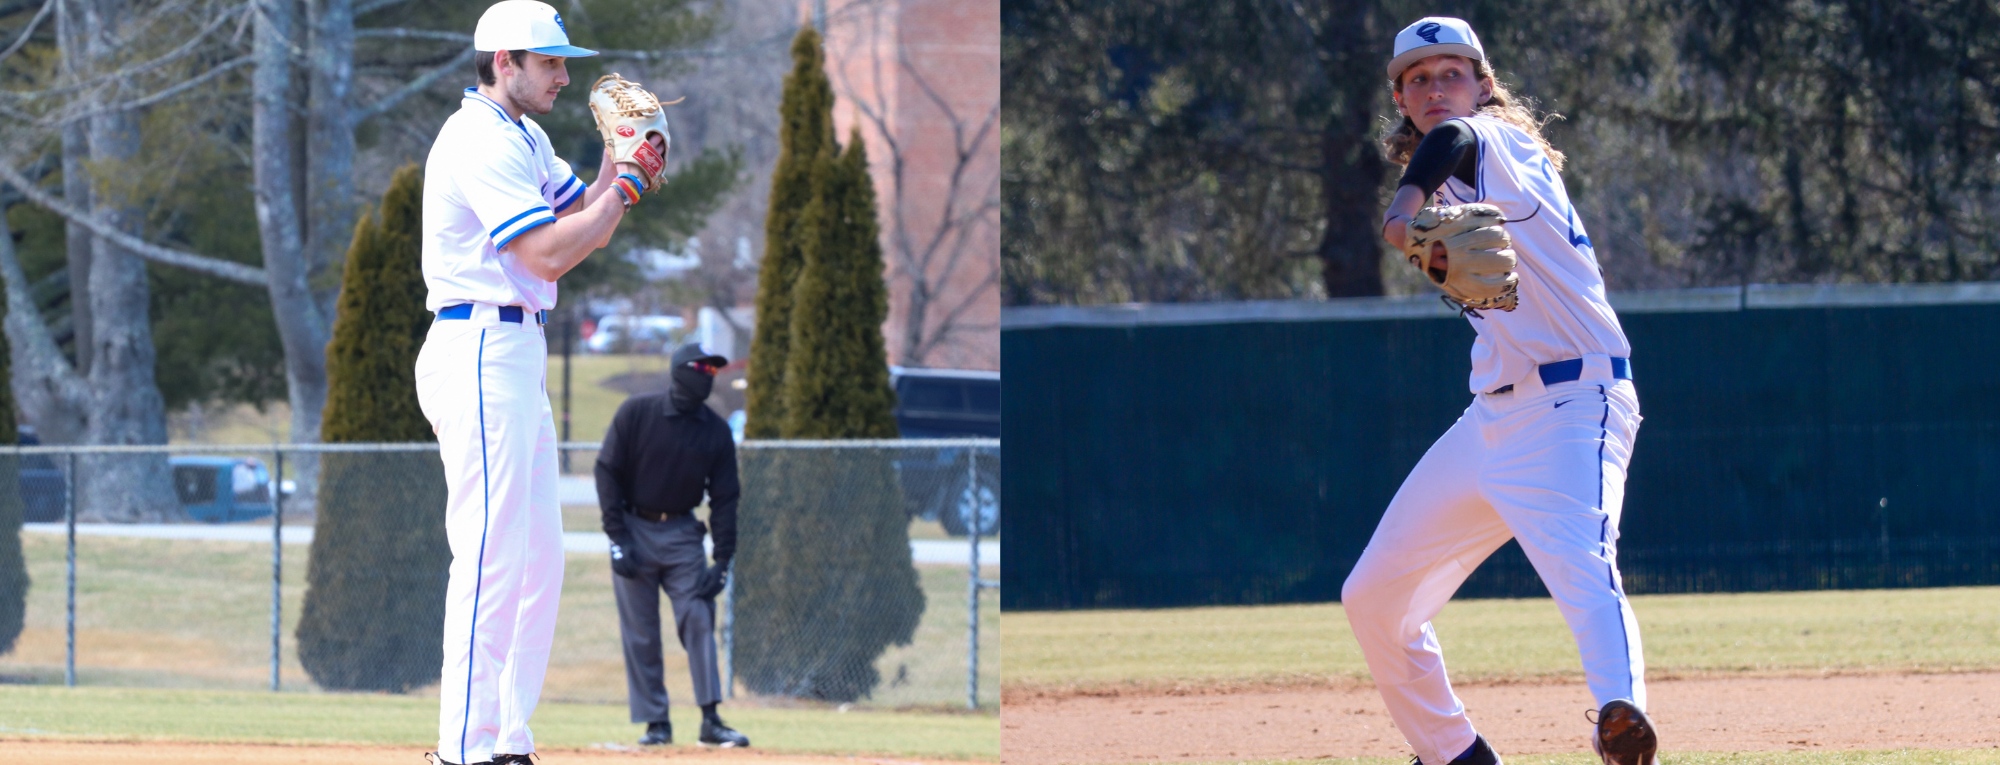 Matthew Scavotto (left) and Trenten Anderson (right) each tossed complete games in Brevard's doubleheader sweep of Averett (Photos courtesy of Victoria Brayman '22 and Brianna Rodibaugh '24).